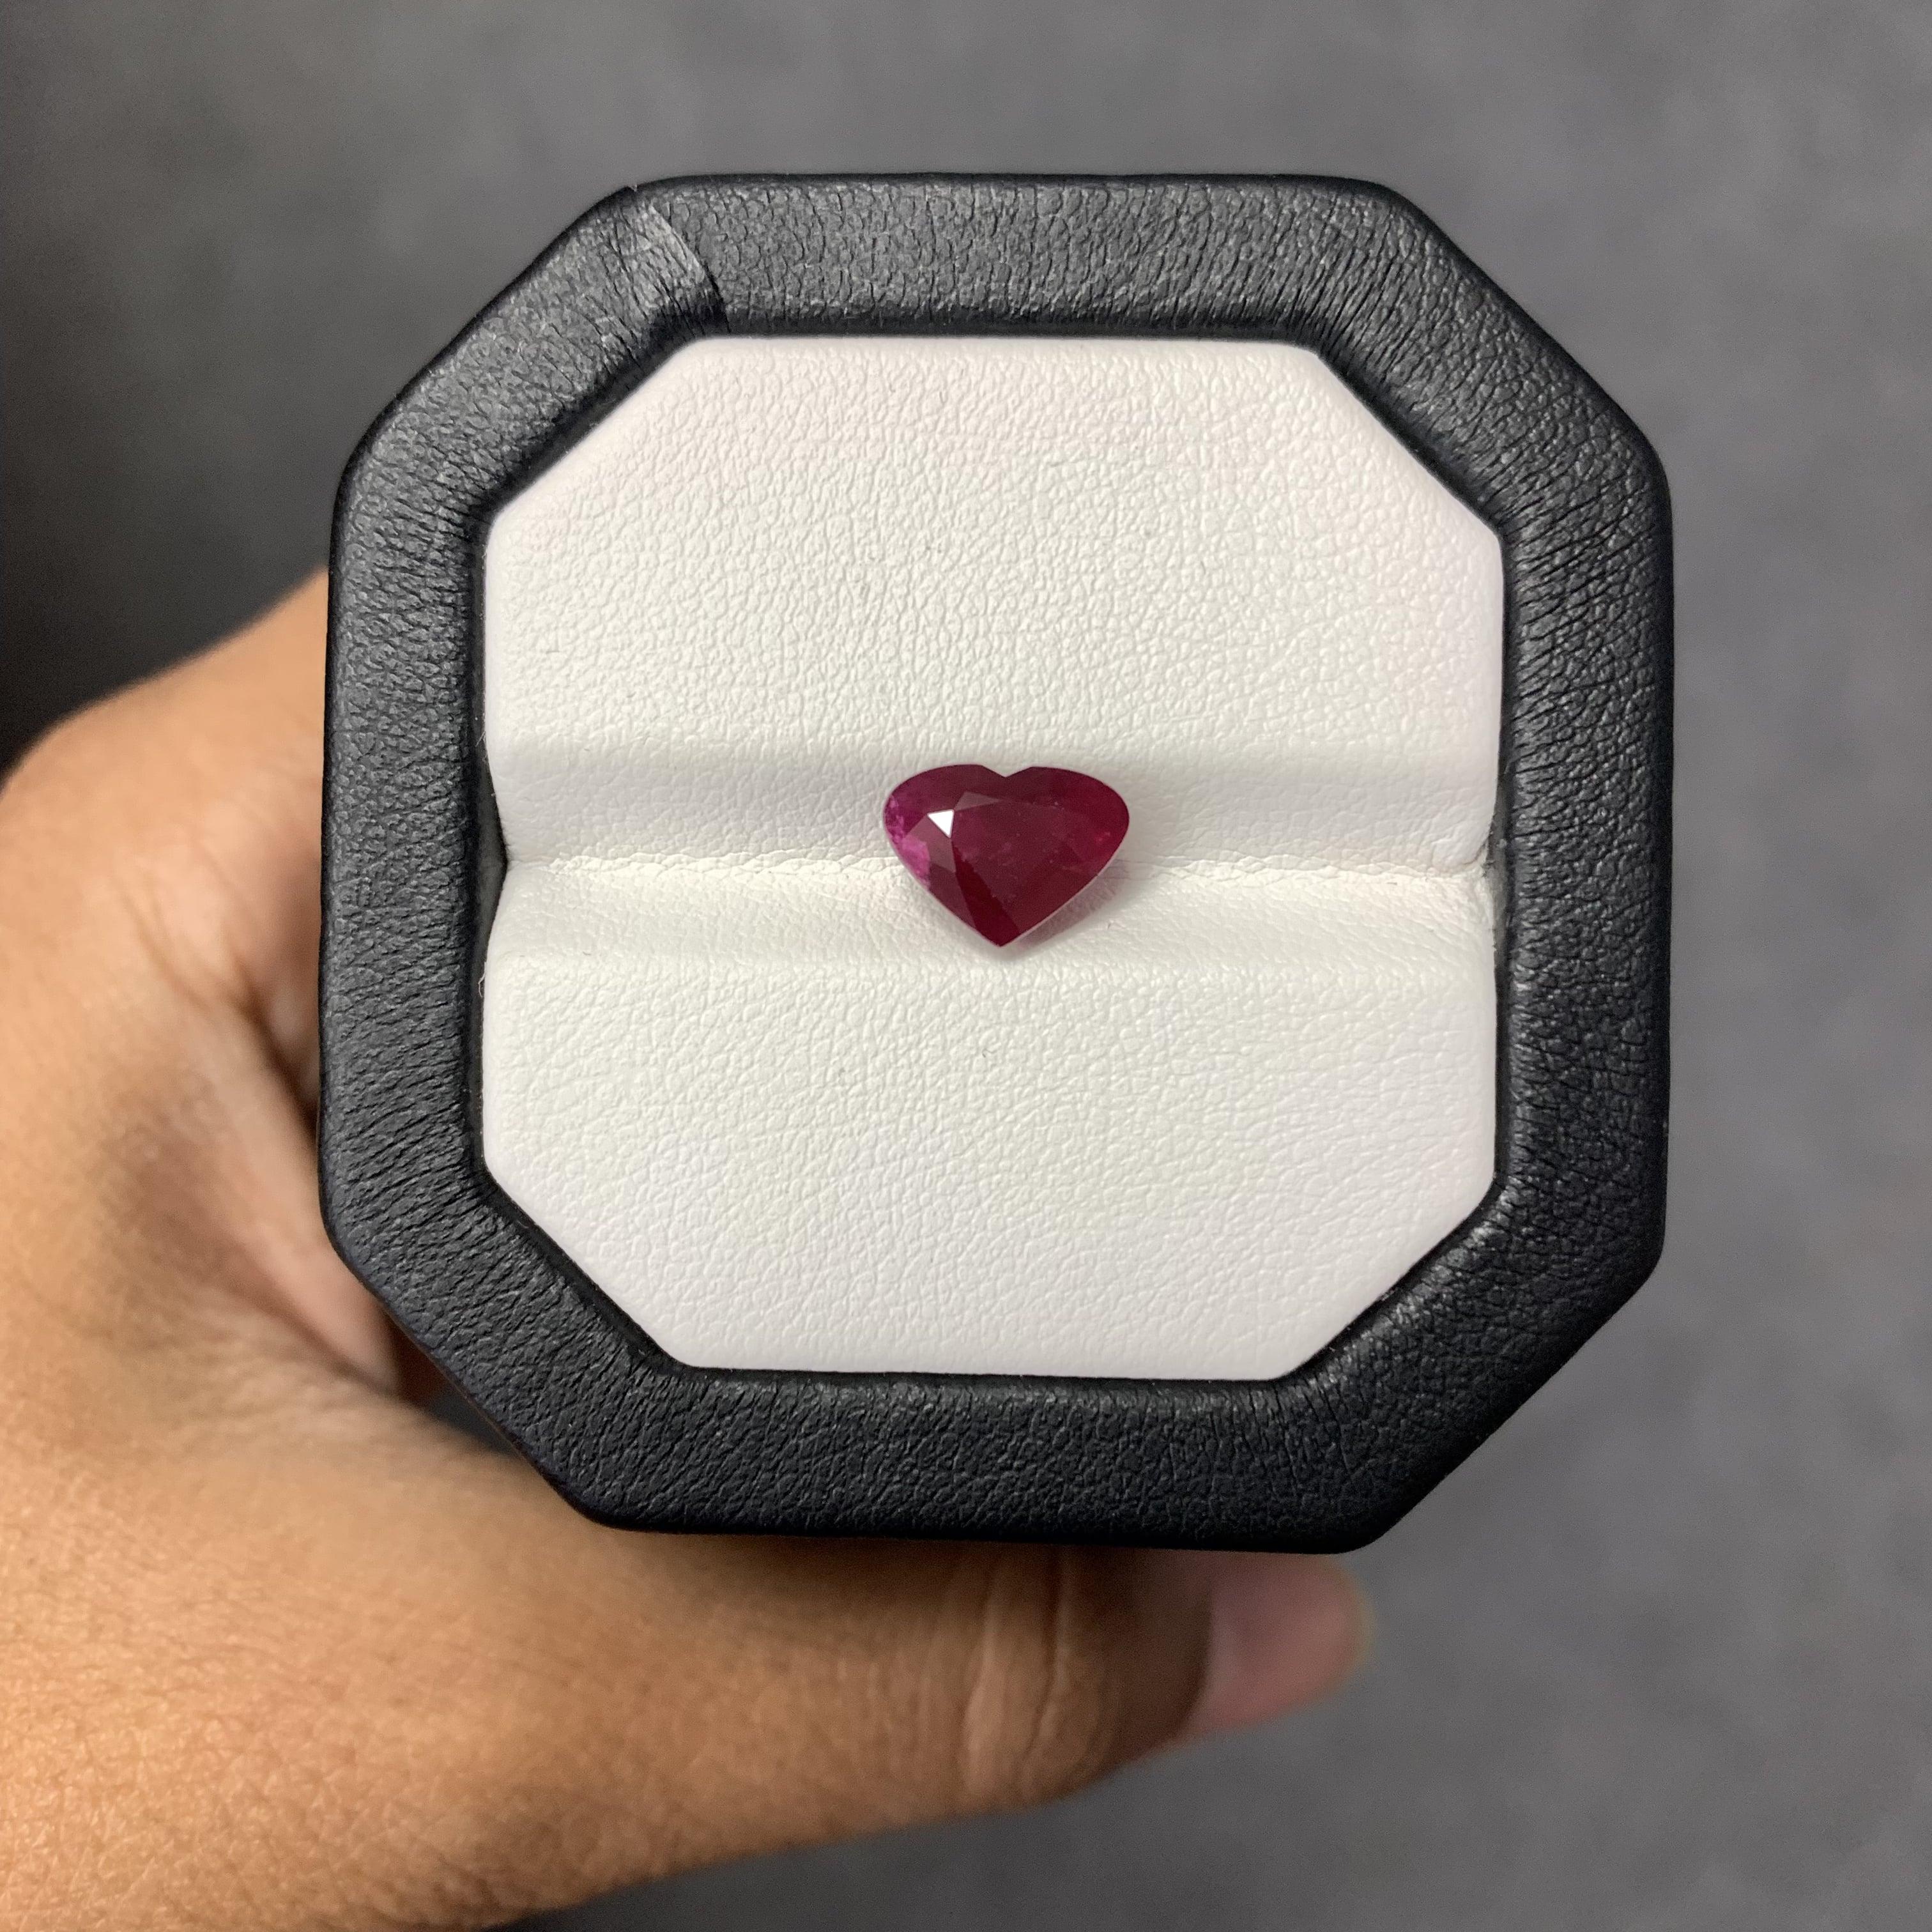 Heart Cut 2.47 Carat Heart Shaped Natural Ruby Valentine's Day Special